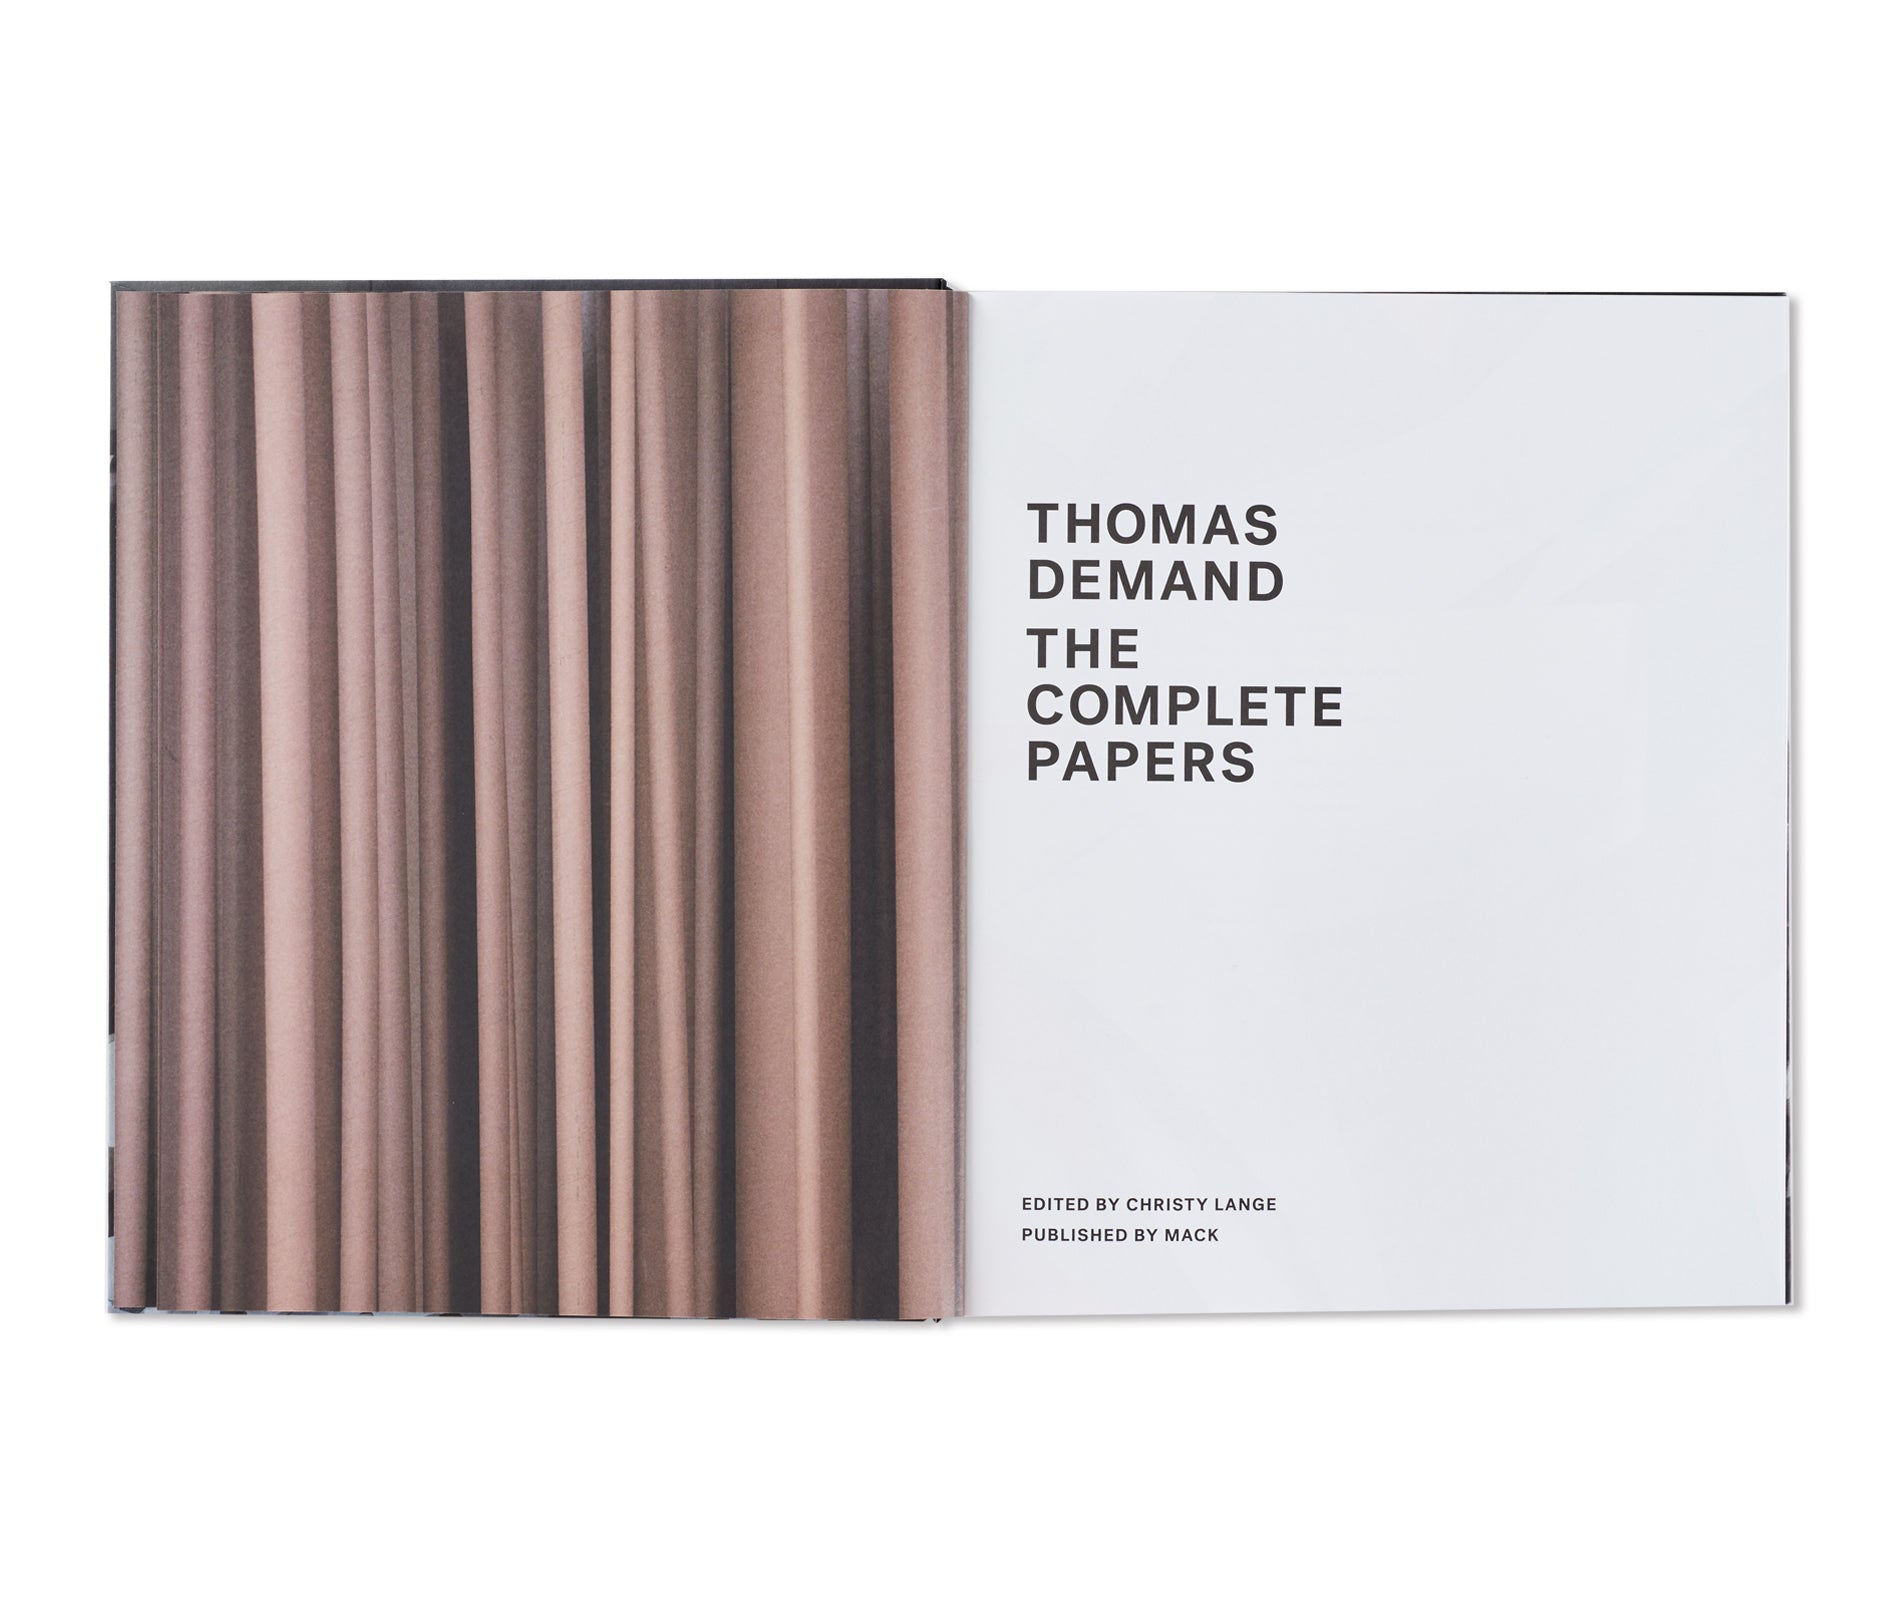 THE COMPLETE PAPERS by Thomas Demand